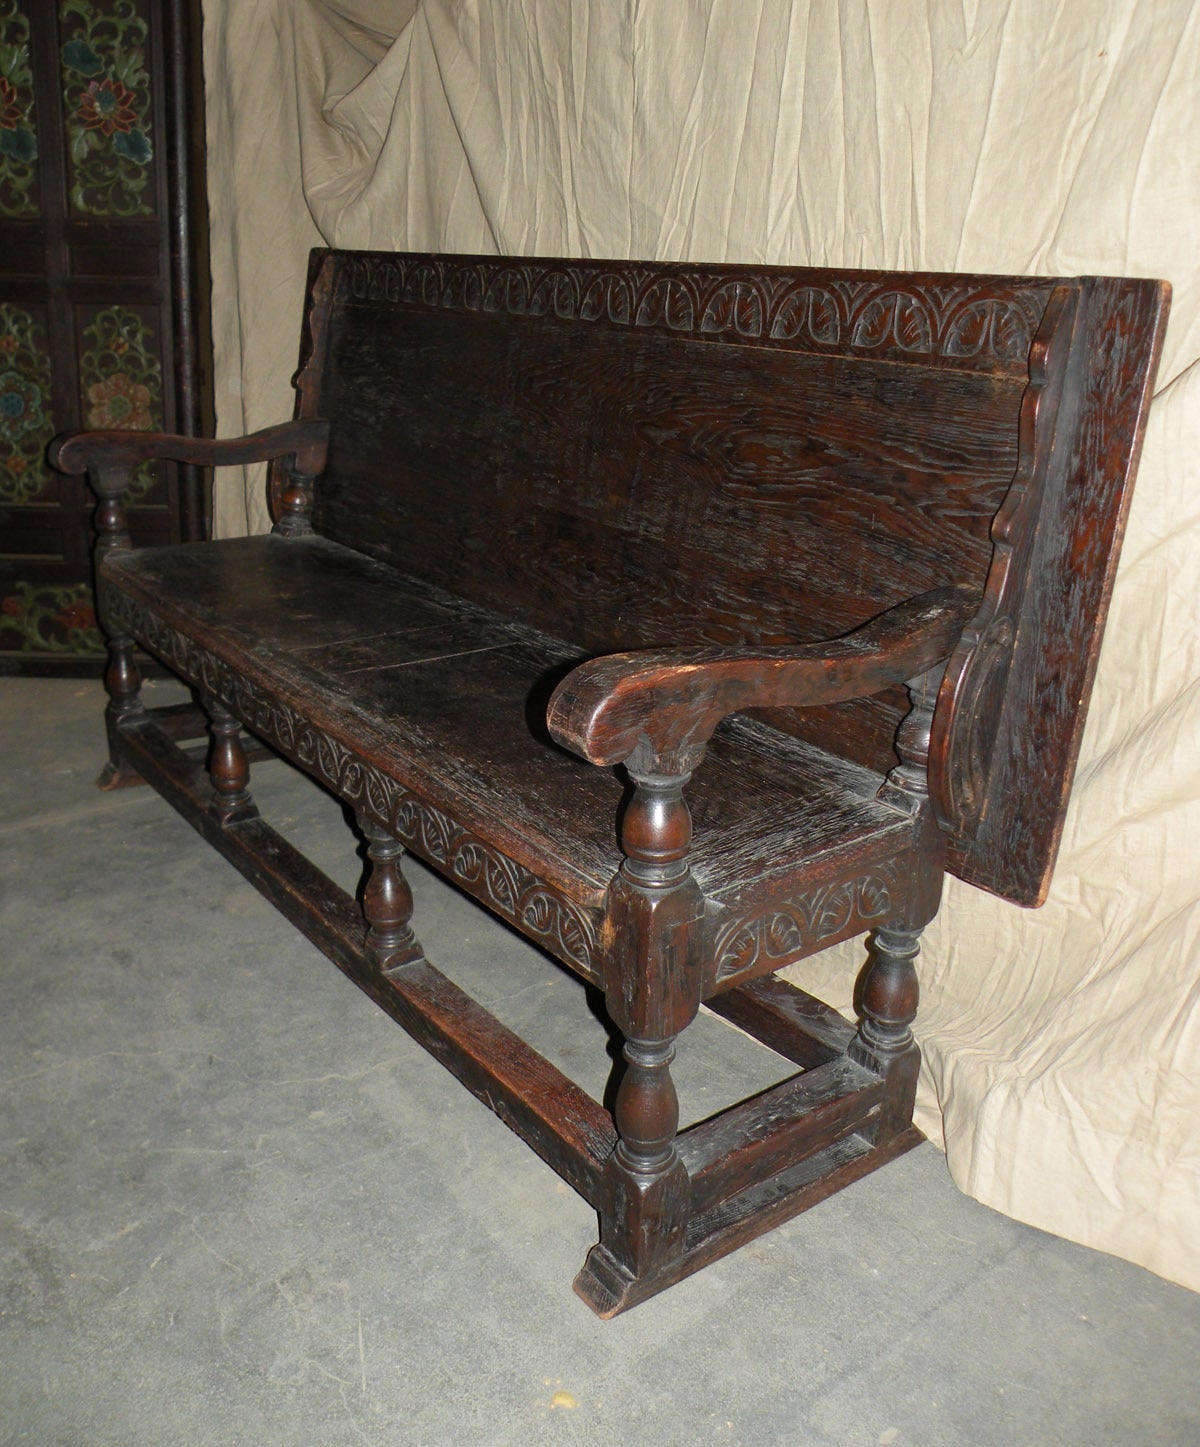 Hand-Carved English Jacobean Table and Bench